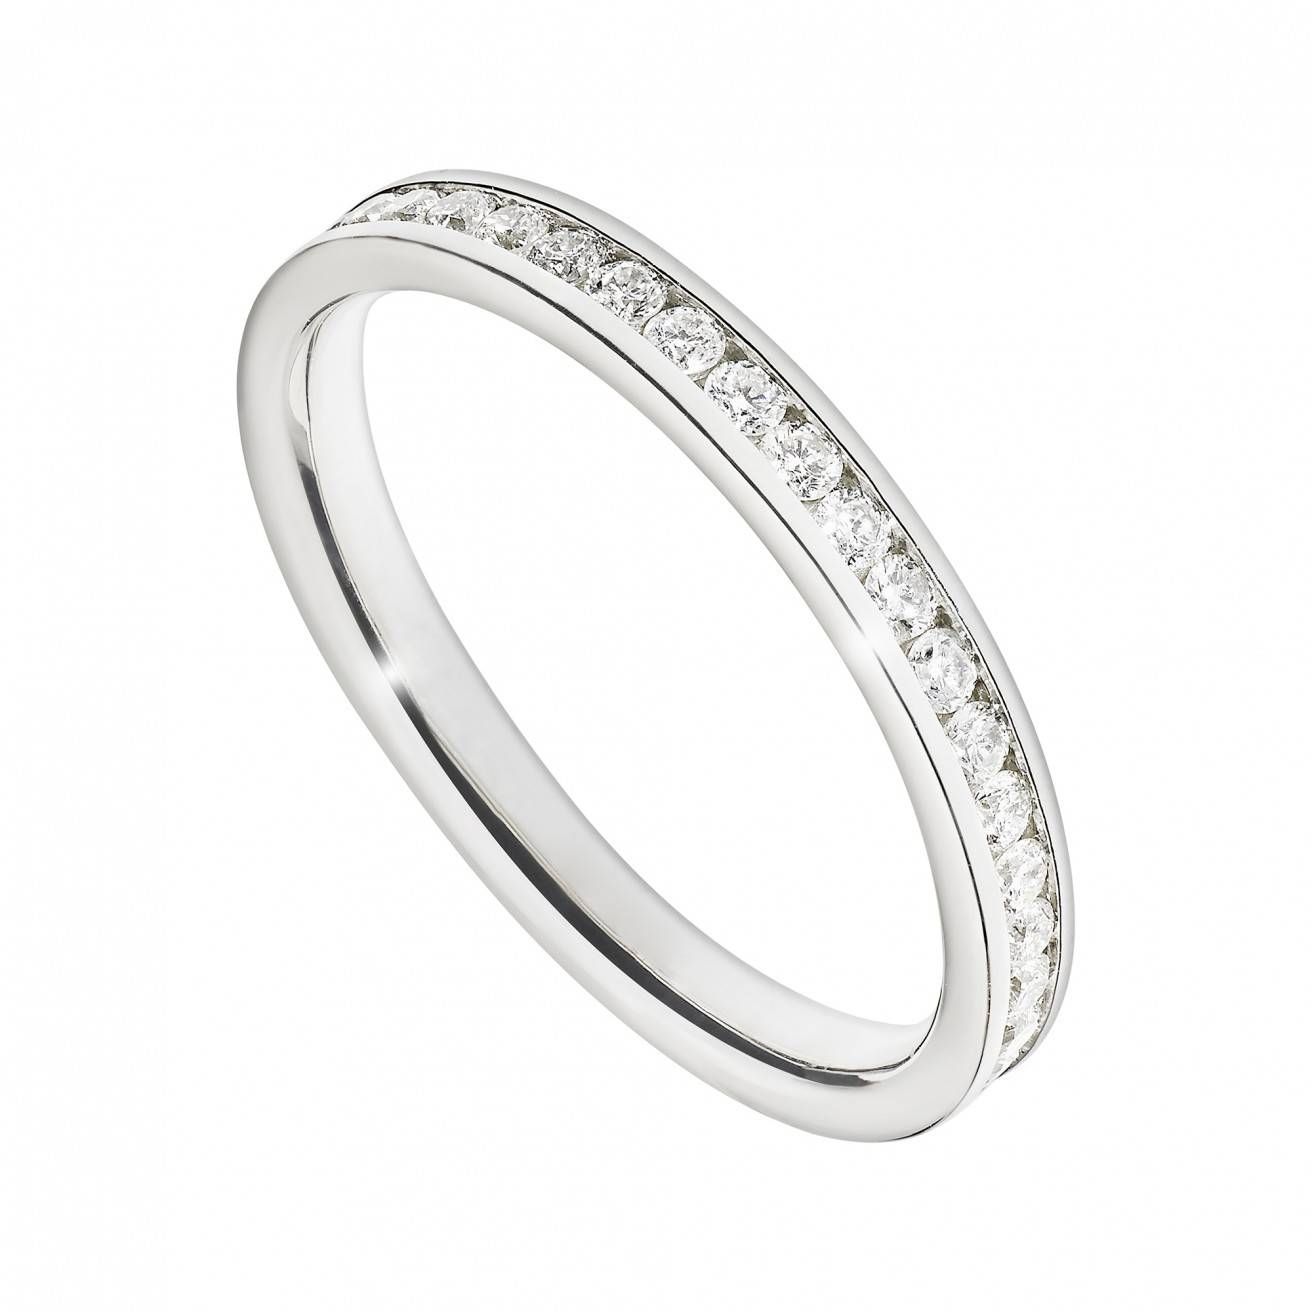 Buy Platinum Wedding Bands Online – Fraser Hart Throughout Platinum And Diamond Wedding Rings (View 1 of 15)